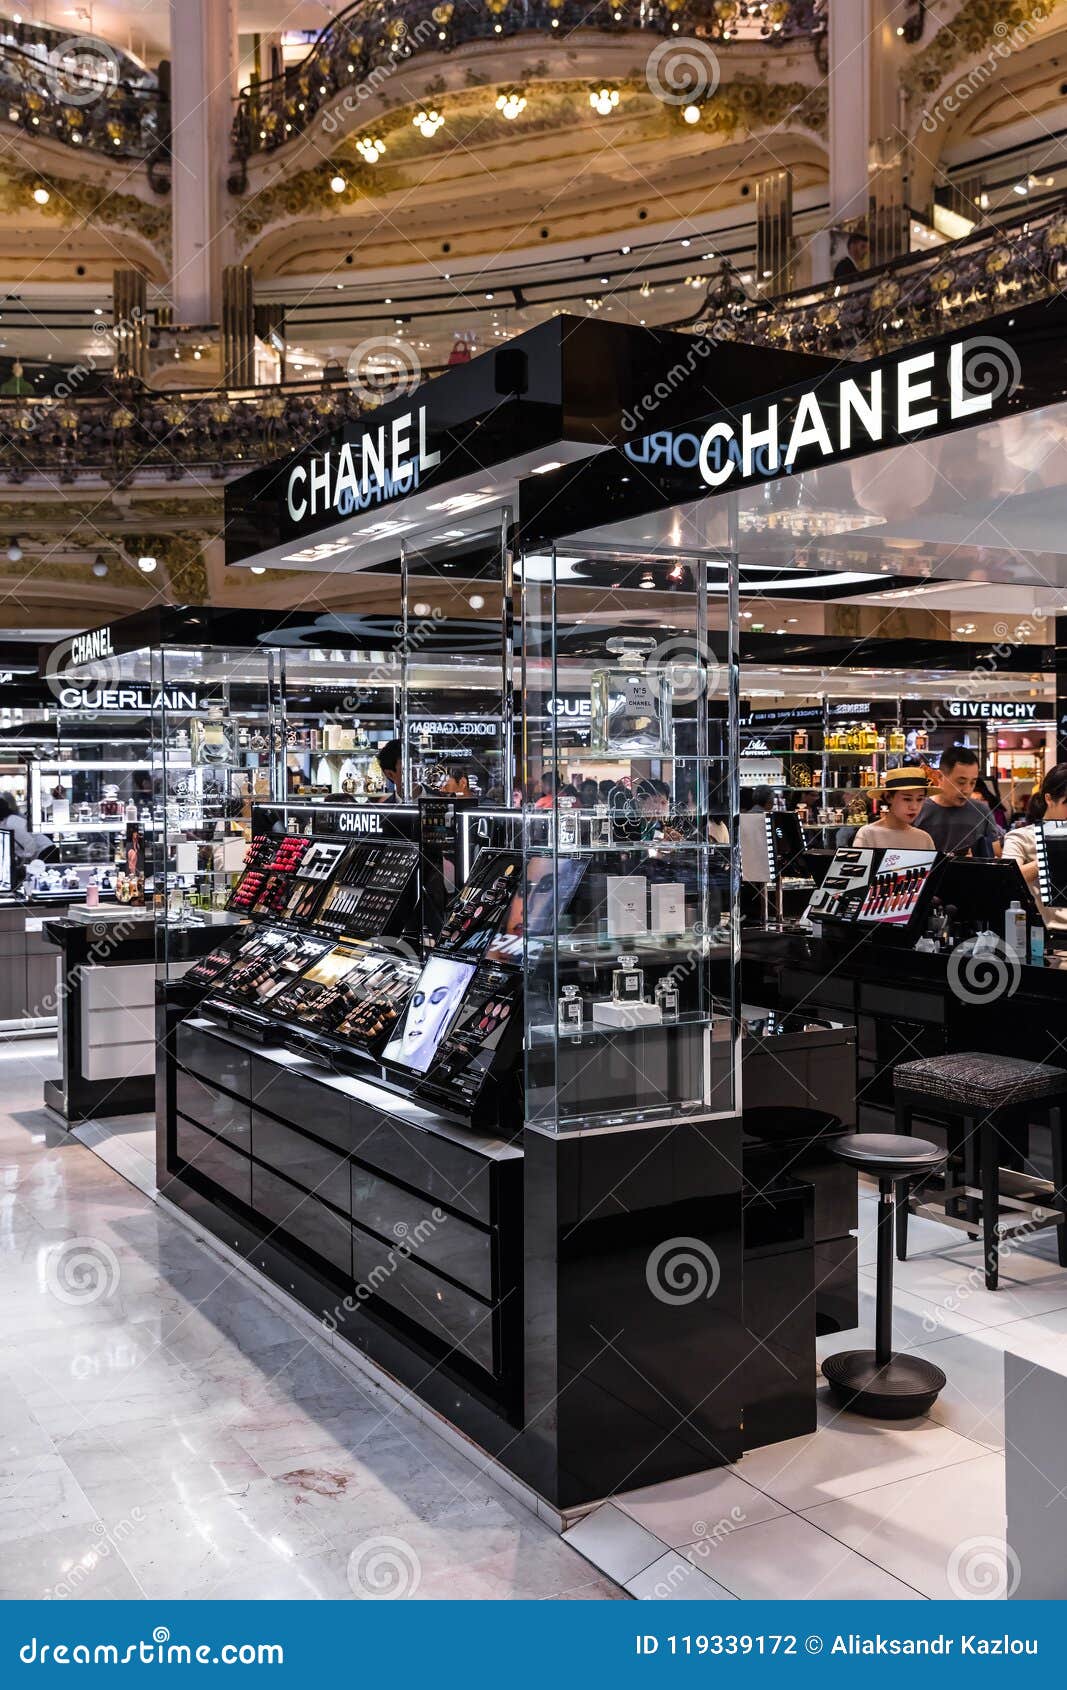 Chanel Shop In The Galeries Lafayette. Paris, France Editorial Photography - Image of business ...